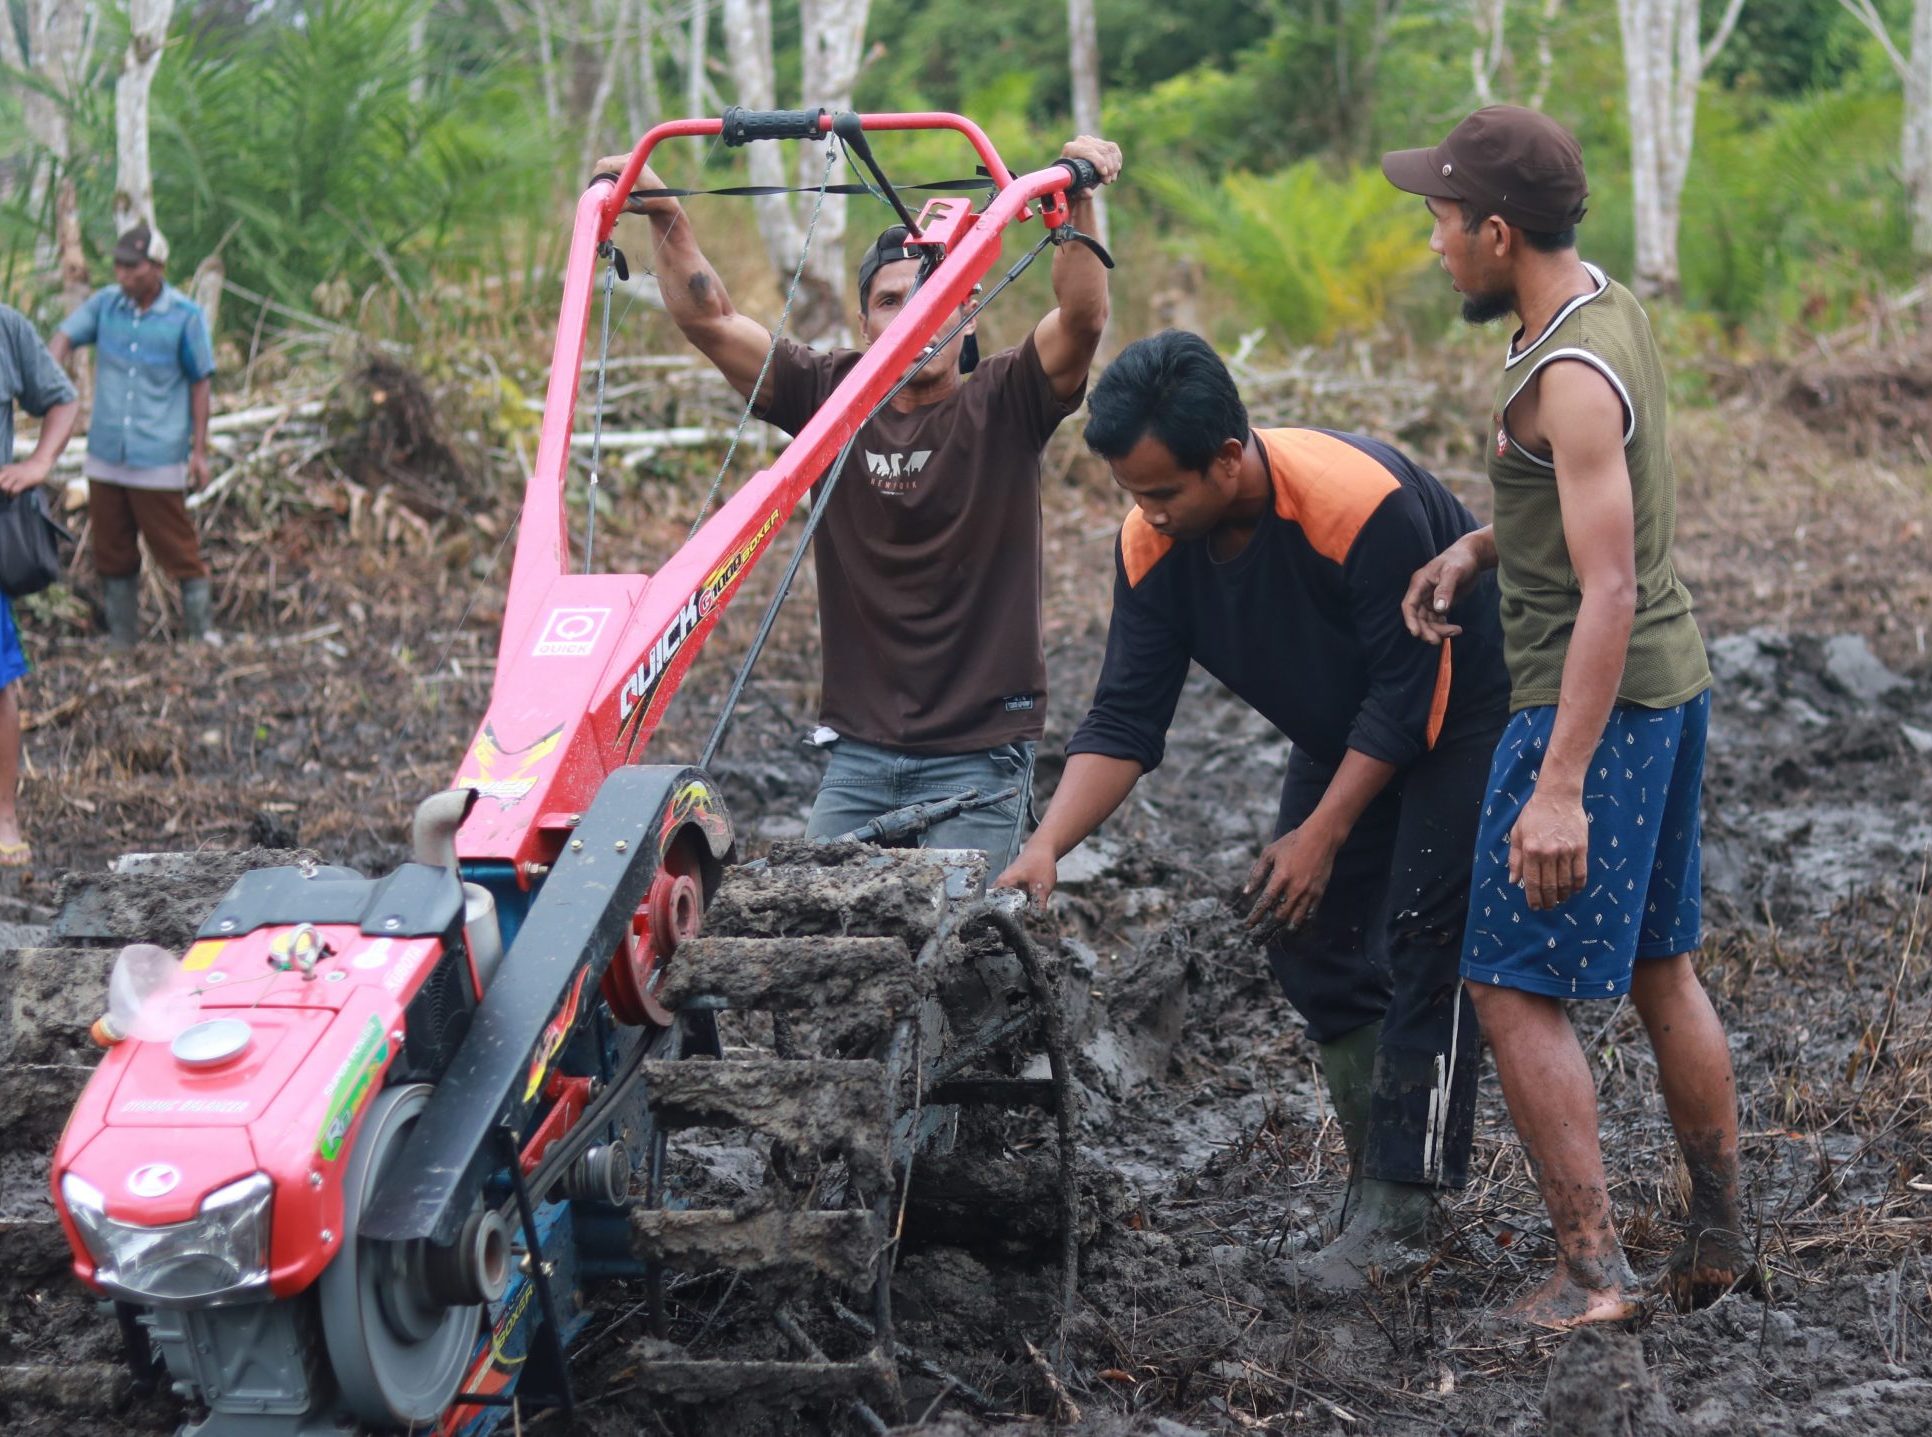 ASRI provides sustainable agriculture training and assistance to former loggers who are now farmers